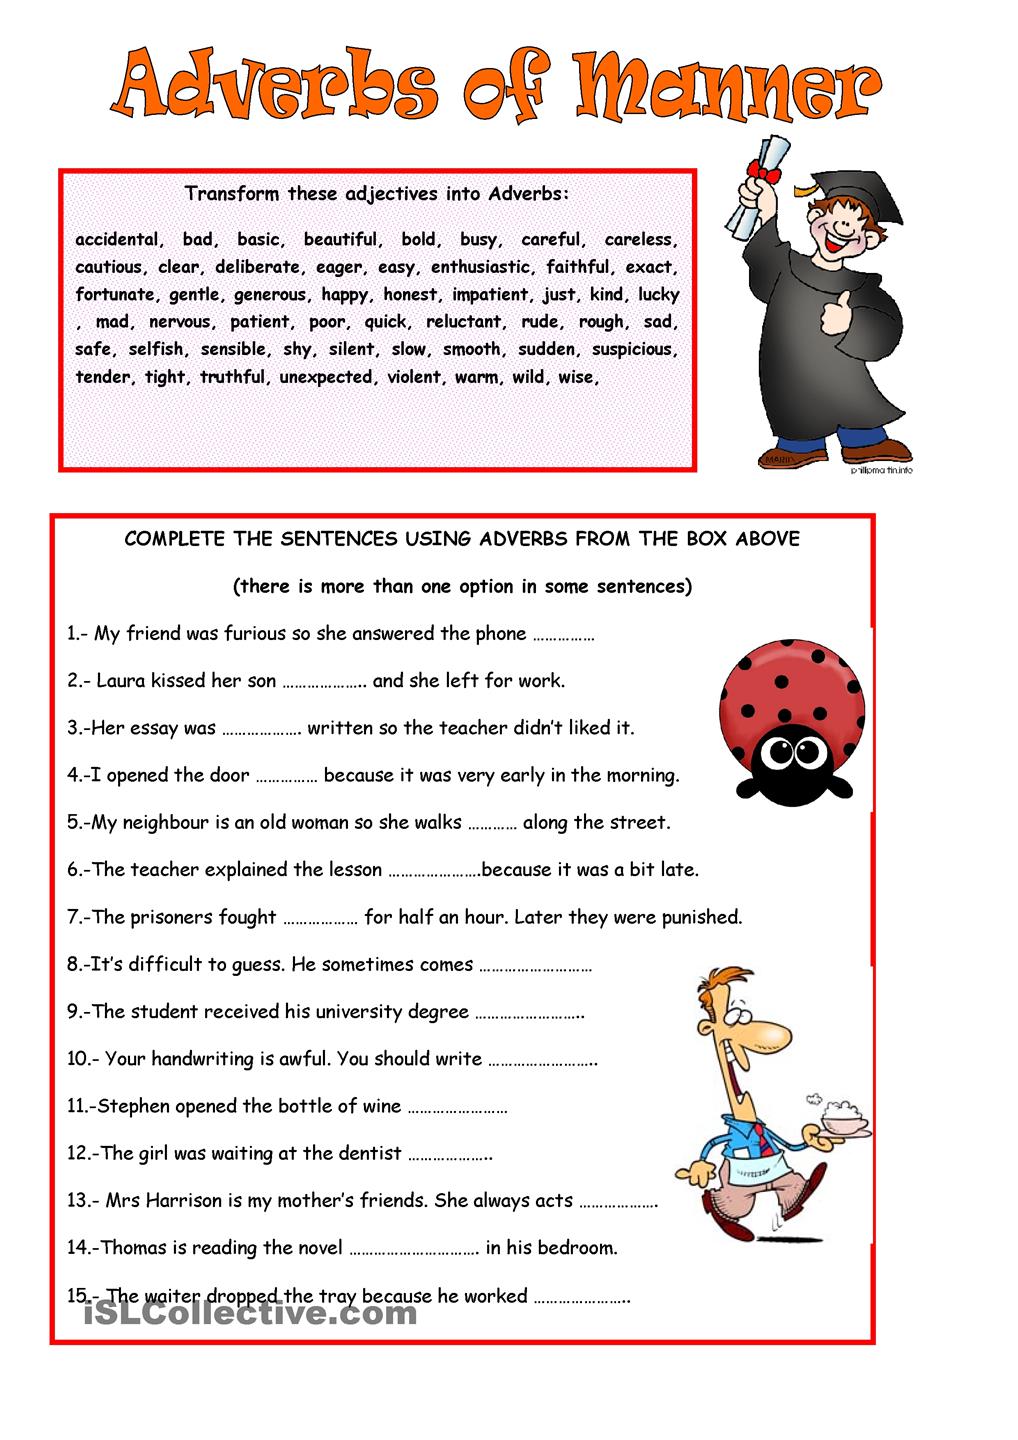 adverbs-adjectives-reading-worksheets-moral-school-subjects-online